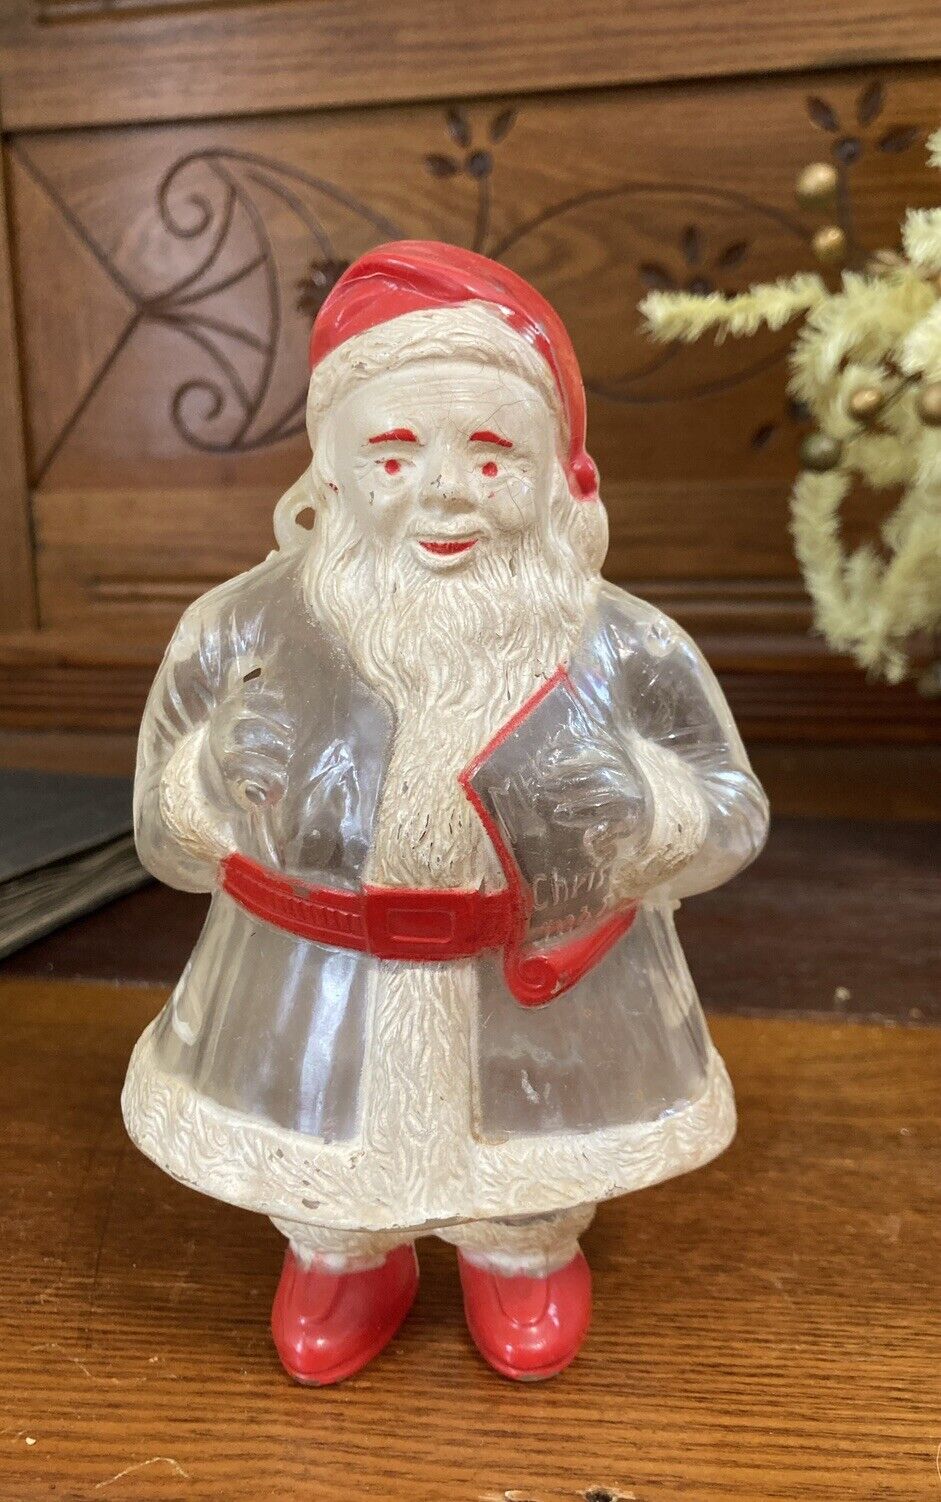 ANTIQUE CLEAR PLASTIC SANTA BANK MADE BY JODA USA FOR CANDY AND COINS